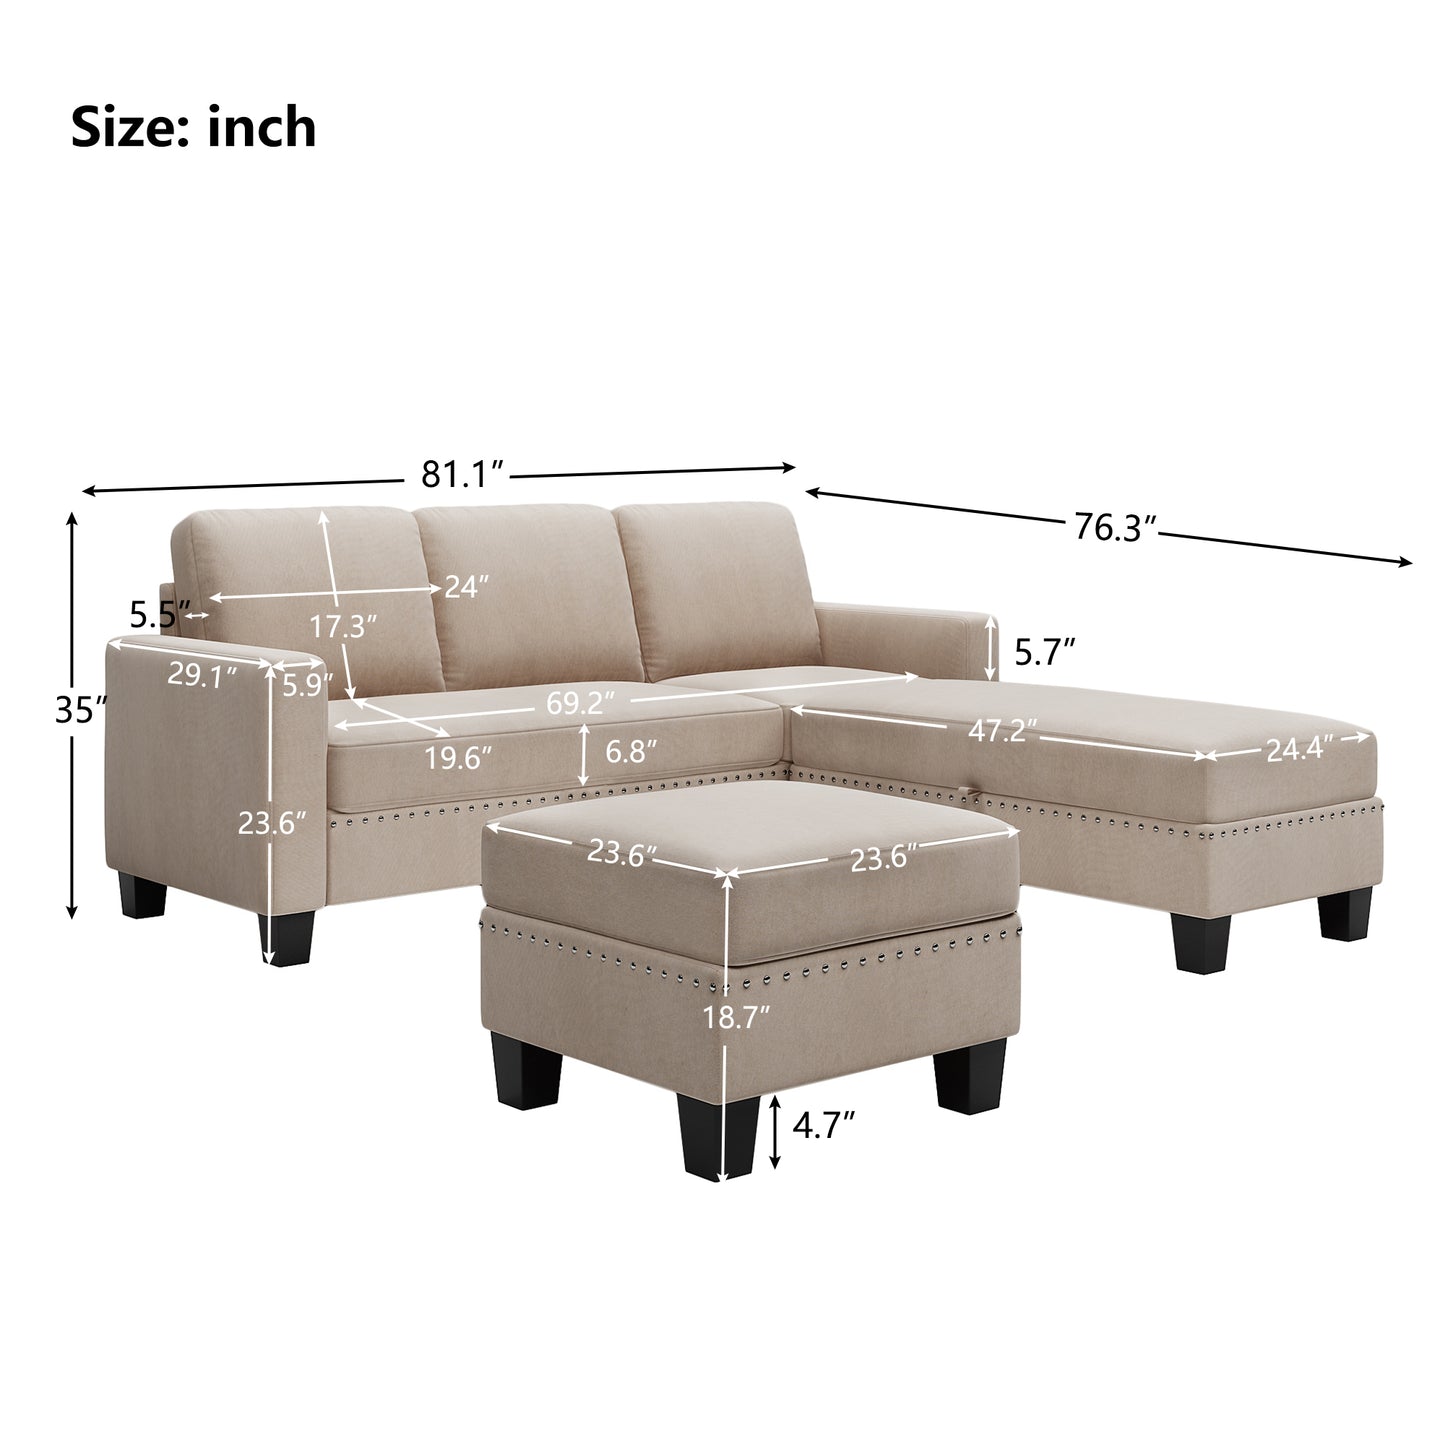 81.1x76.3x35" Nailheaded Textured Fabric 3 pieces Sofa Set, L Sectional Sofa with Ottoman, Reversible Storage Chaise, Warm Grey